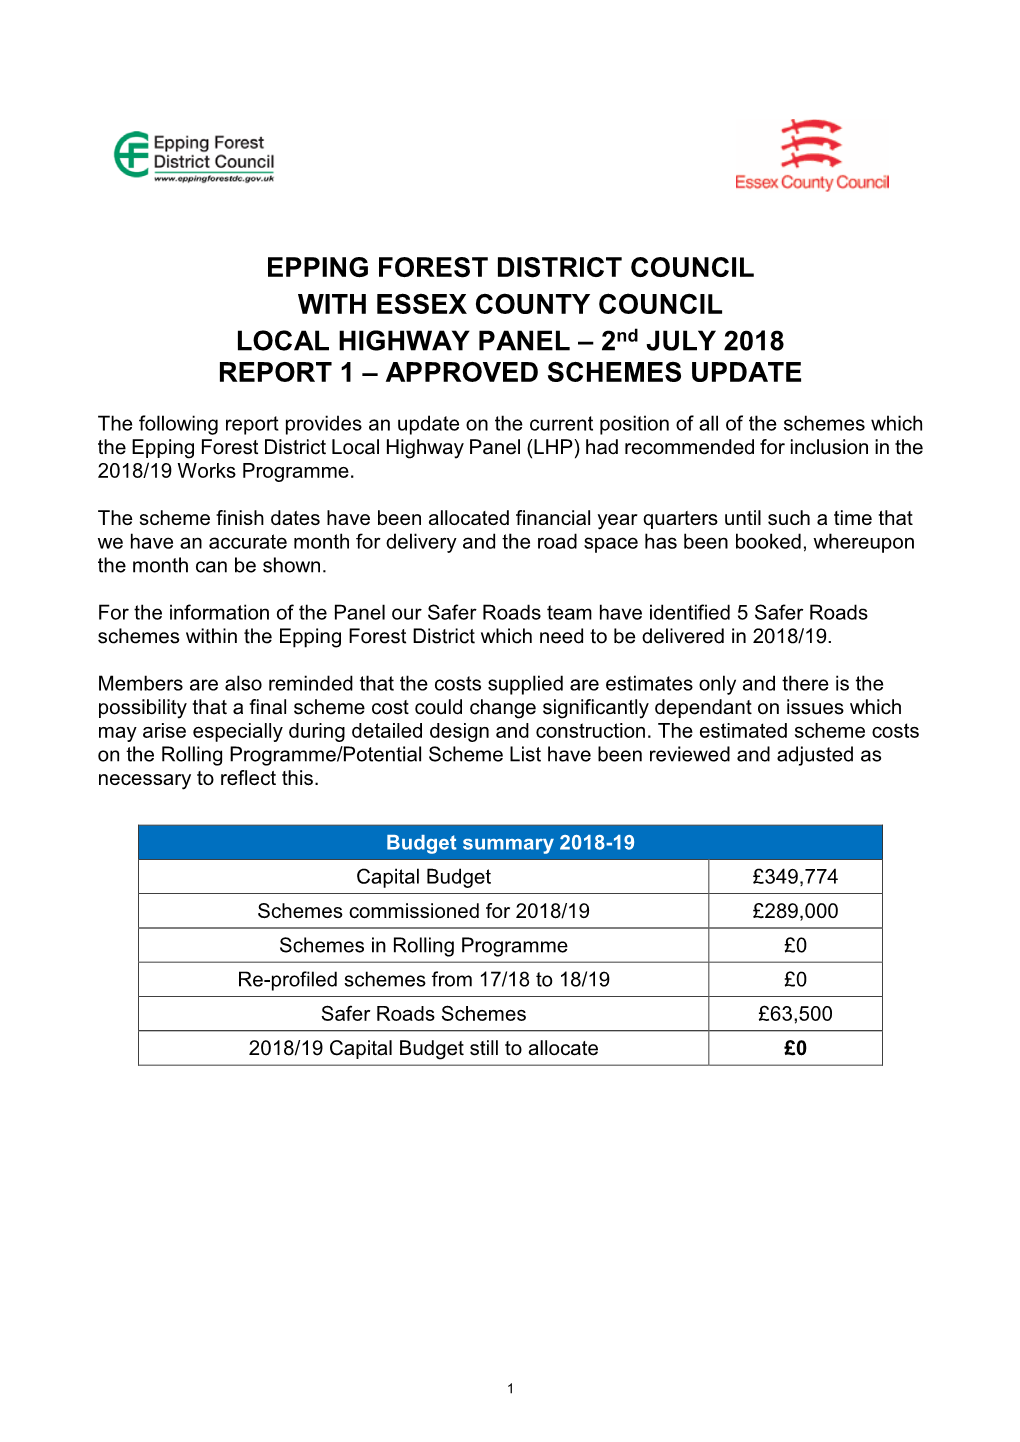 EPPING FOREST DISTRICT COUNCIL with ESSEX COUNTY COUNCIL LOCAL HIGHWAY PANEL – 2Nd JULY 2018 REPORT 1 – APPROVED SCHEMES UPDATE